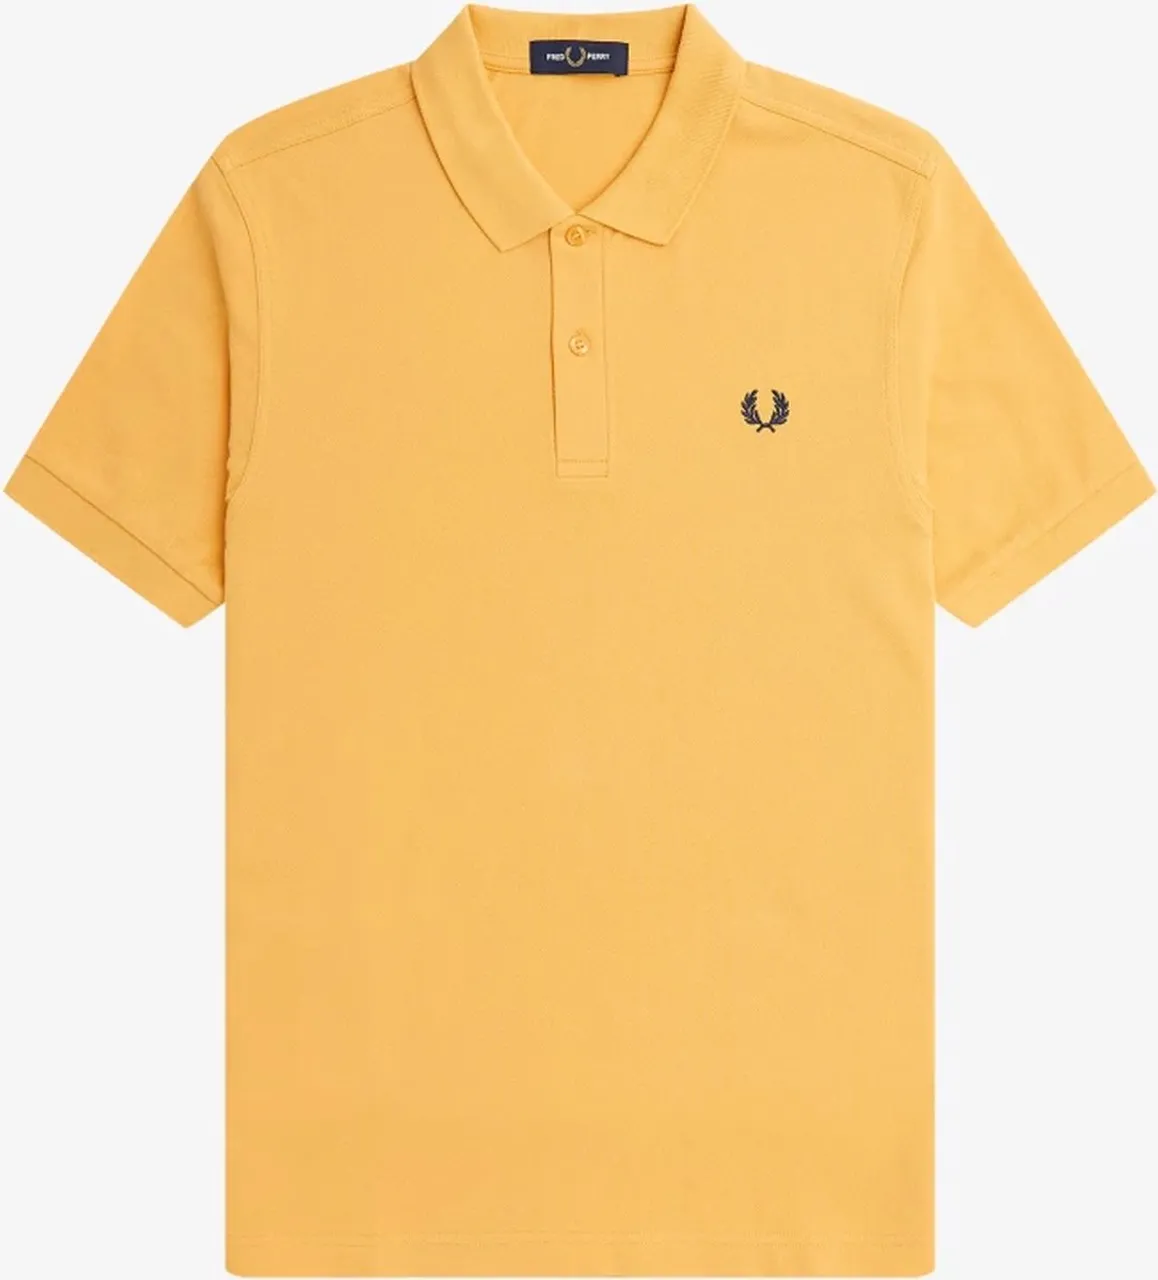 Fred Perry M3600 polo twin tipped shirt - pique - Golden Hour